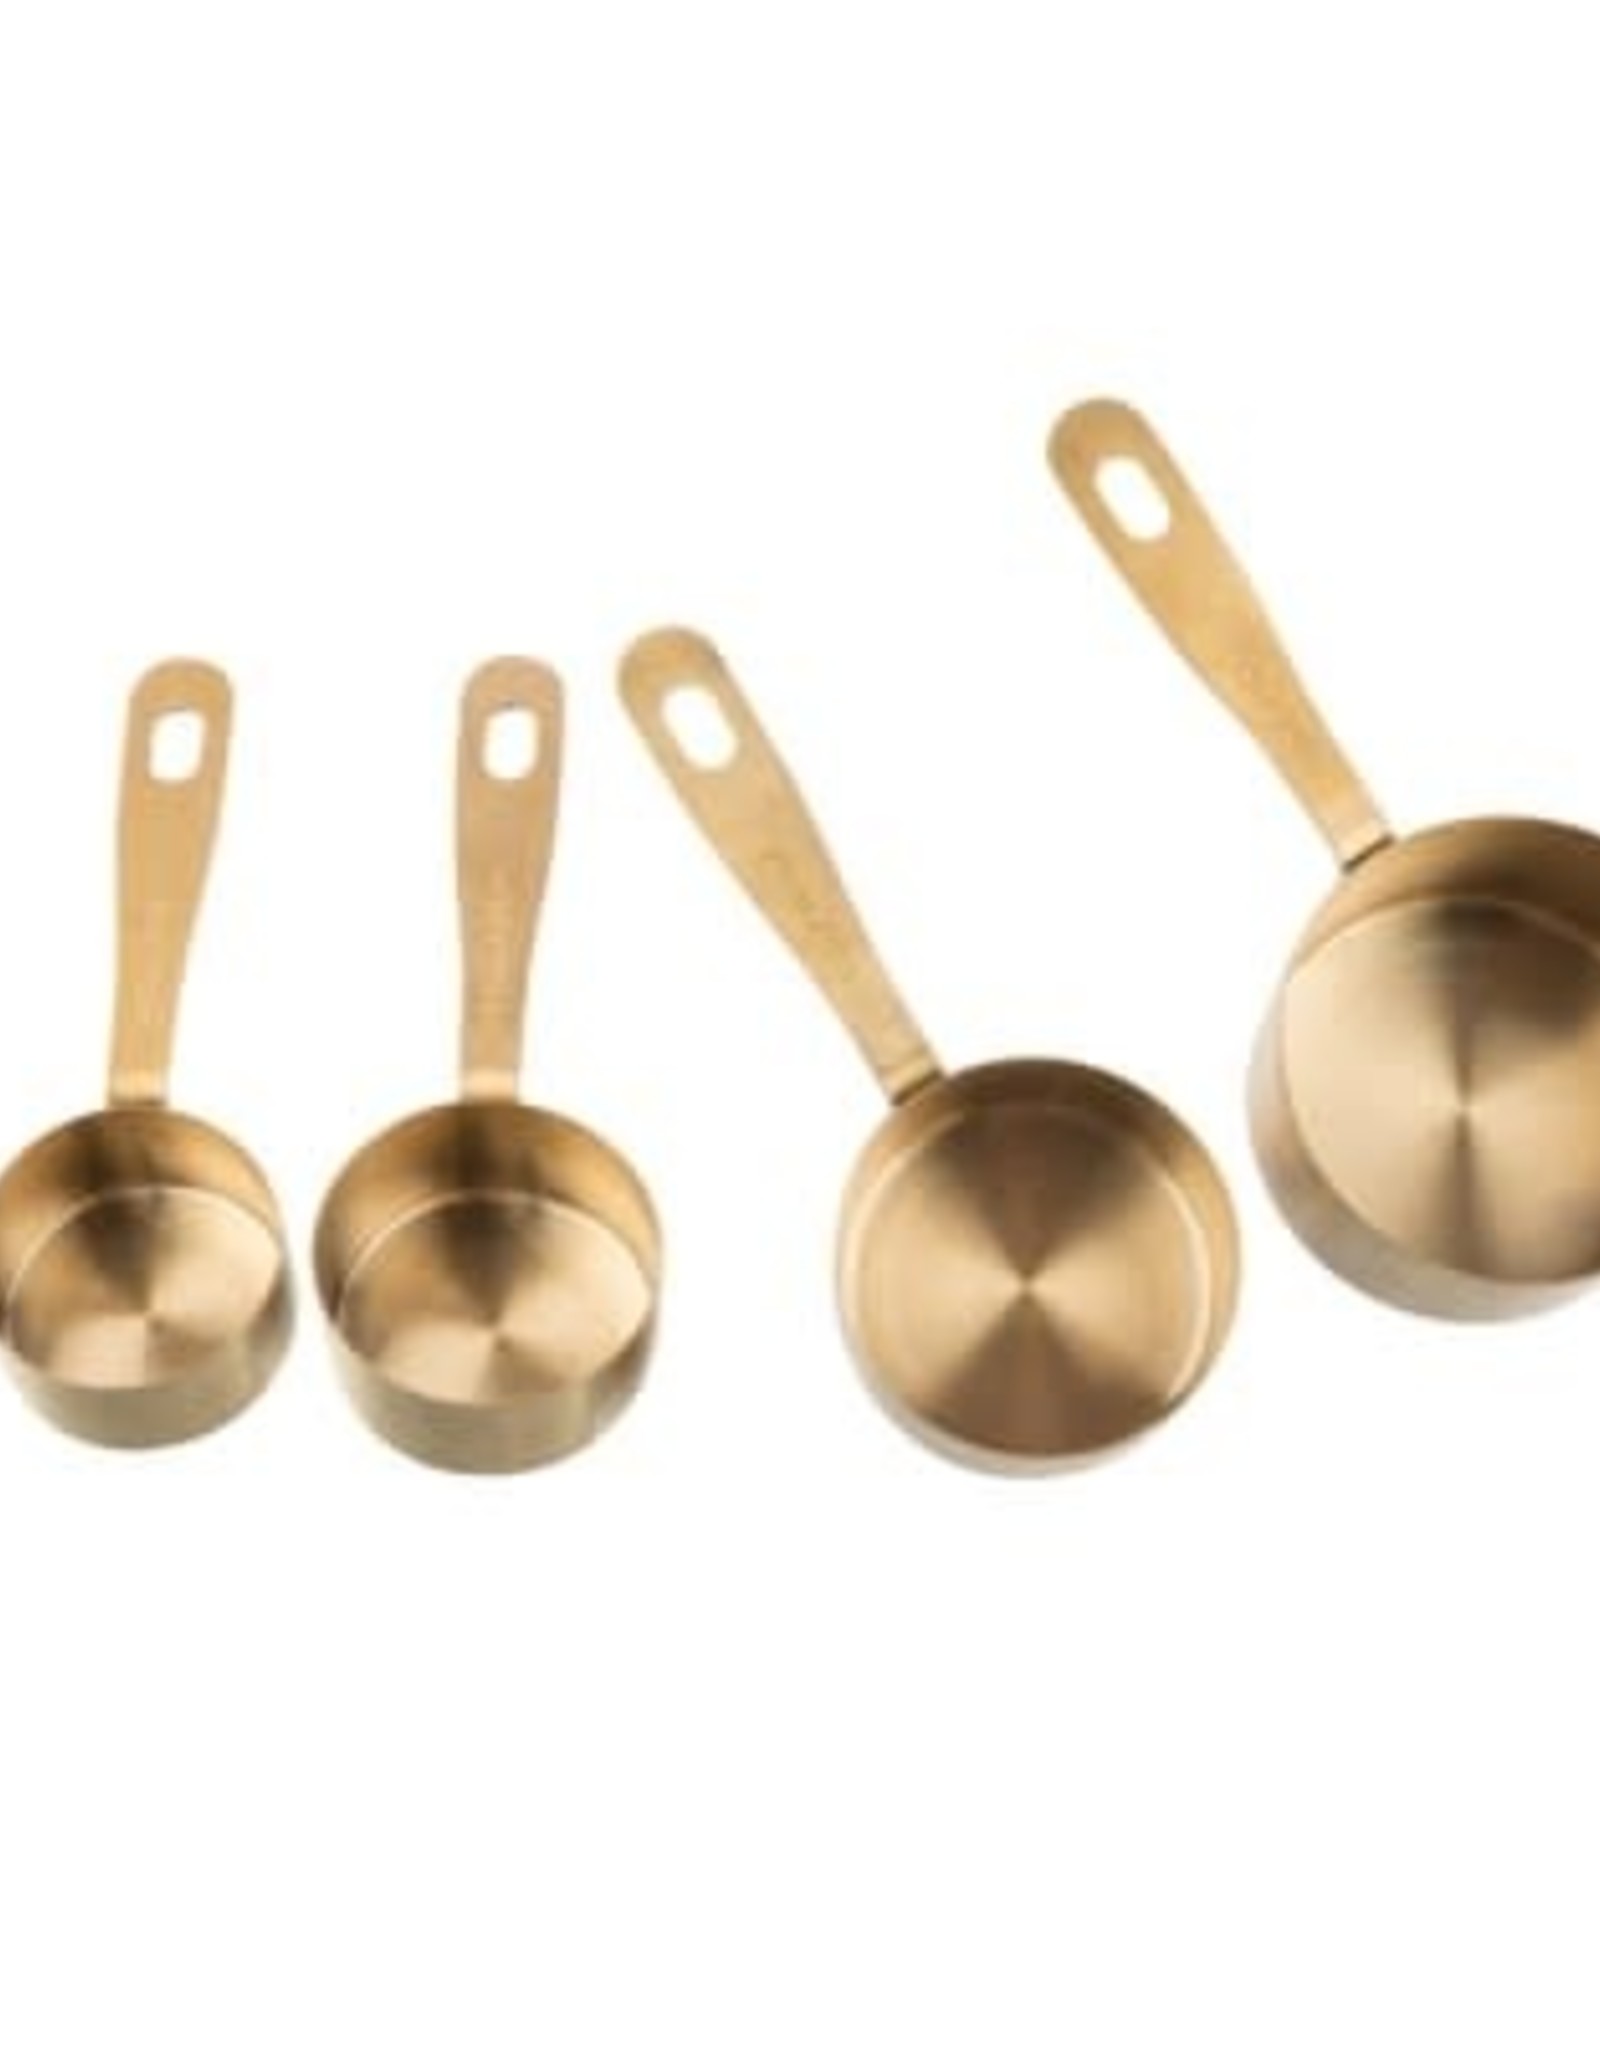 Brass Measuring Cups - Set of 4